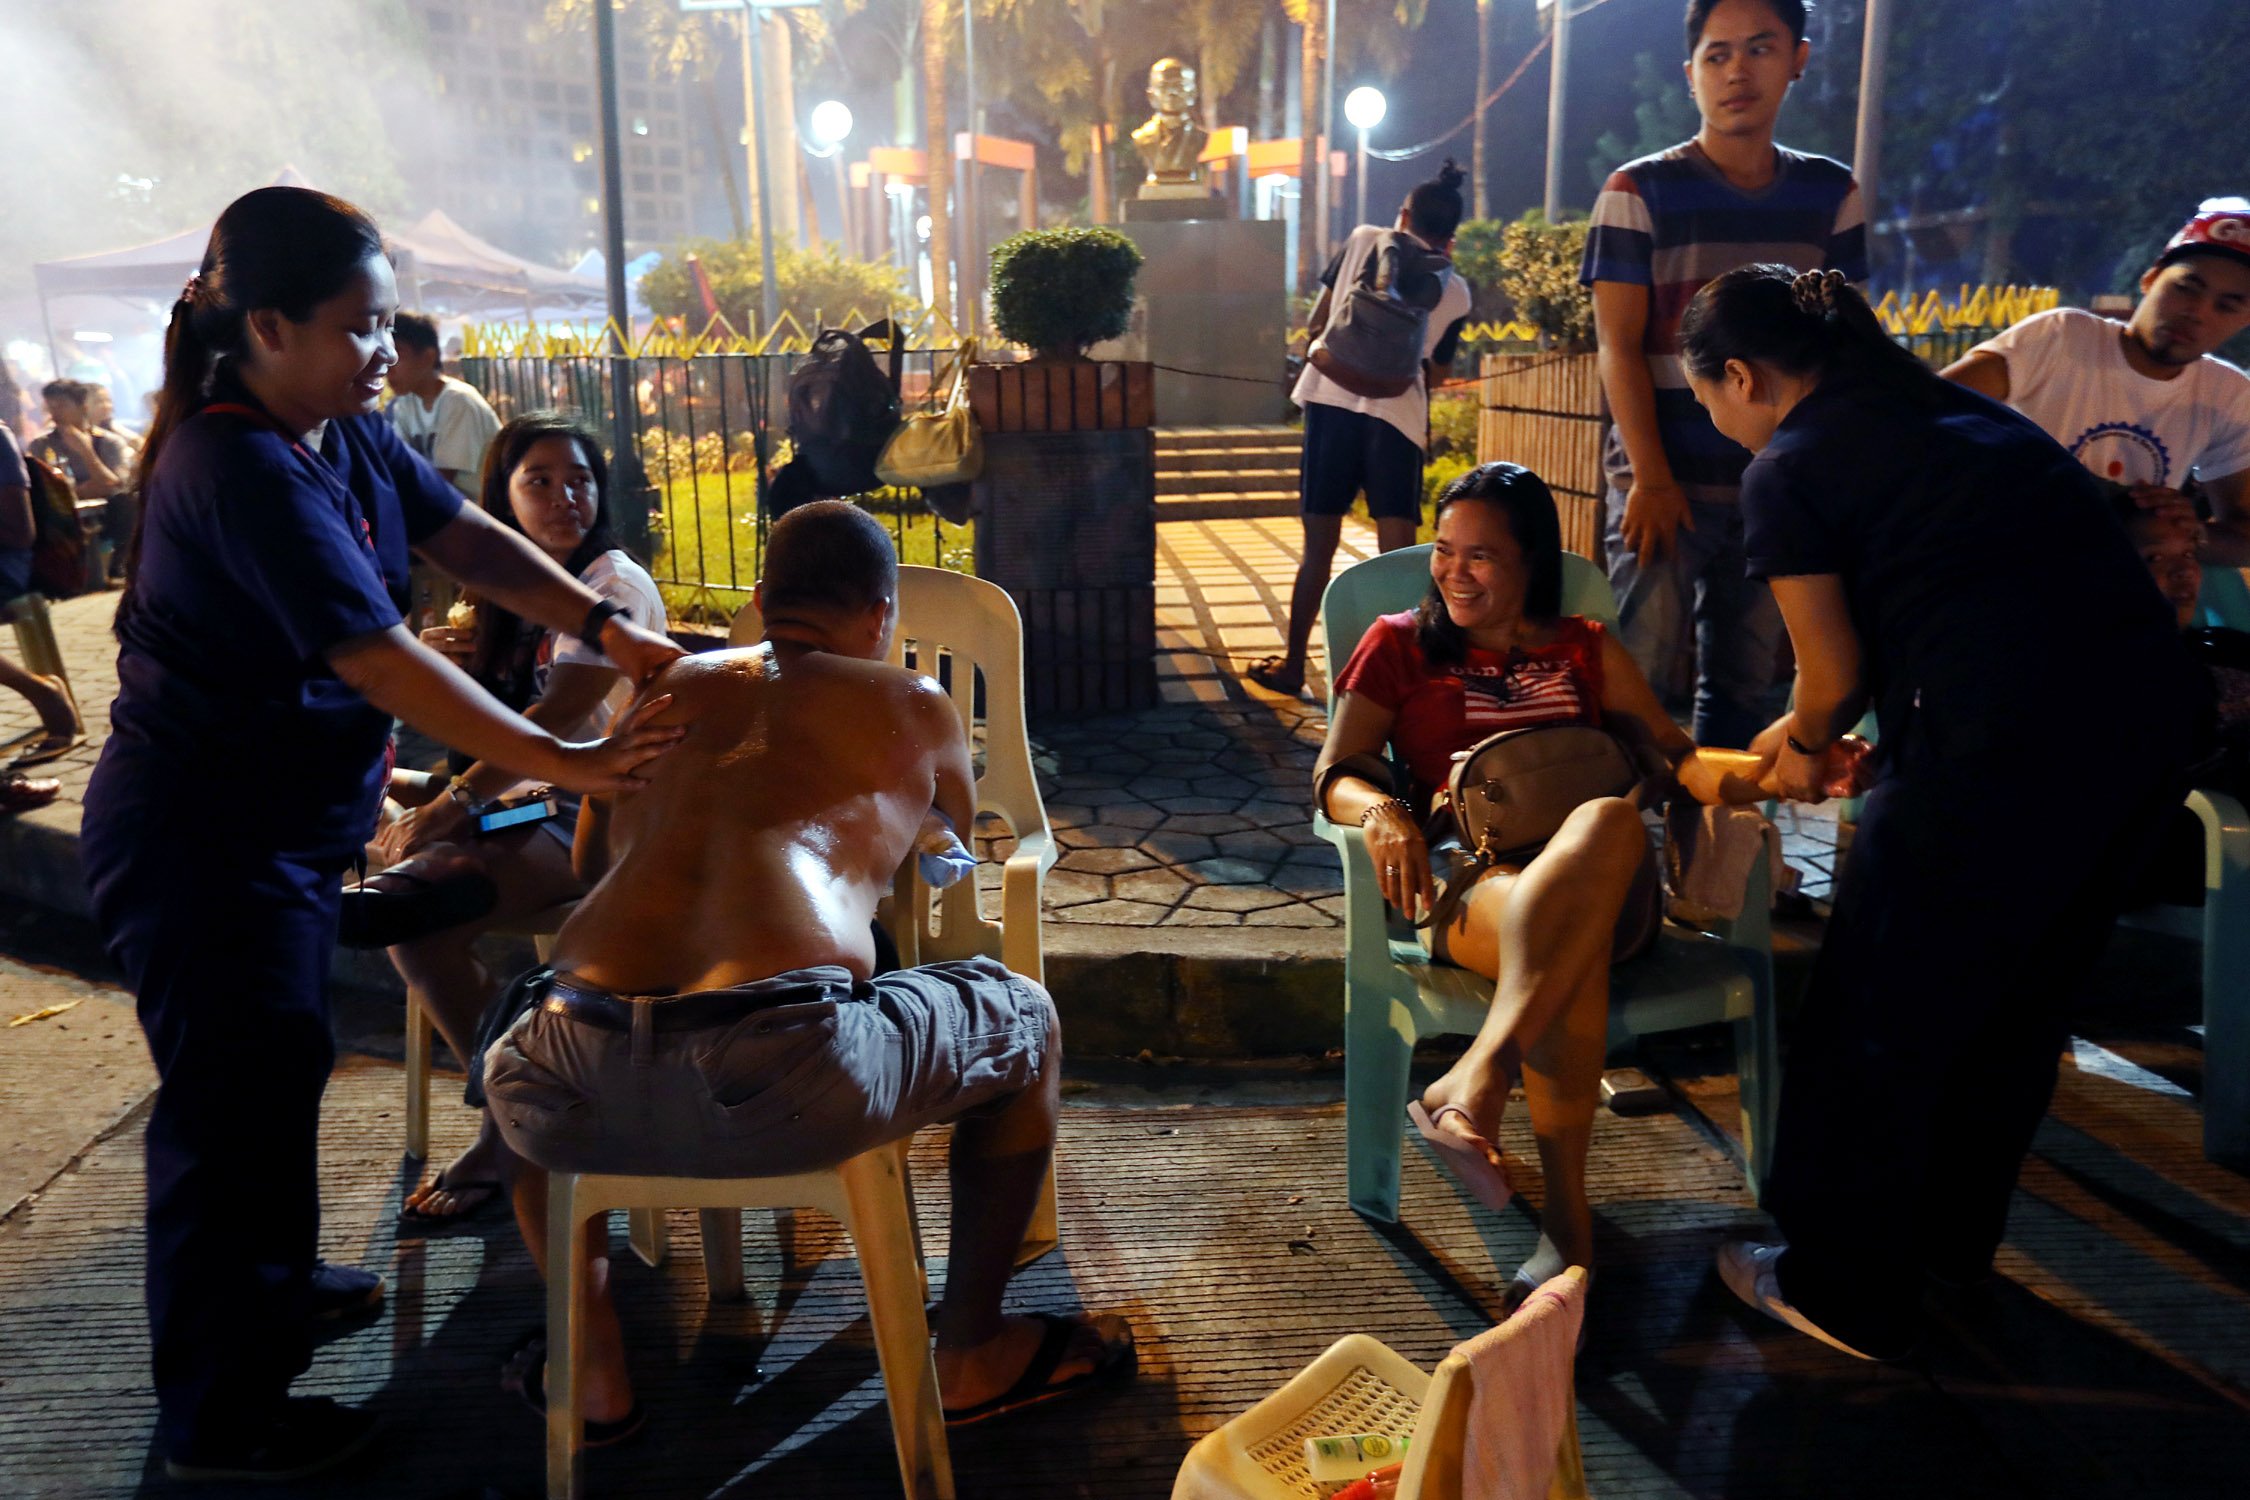 Business as usual at Davao City night market